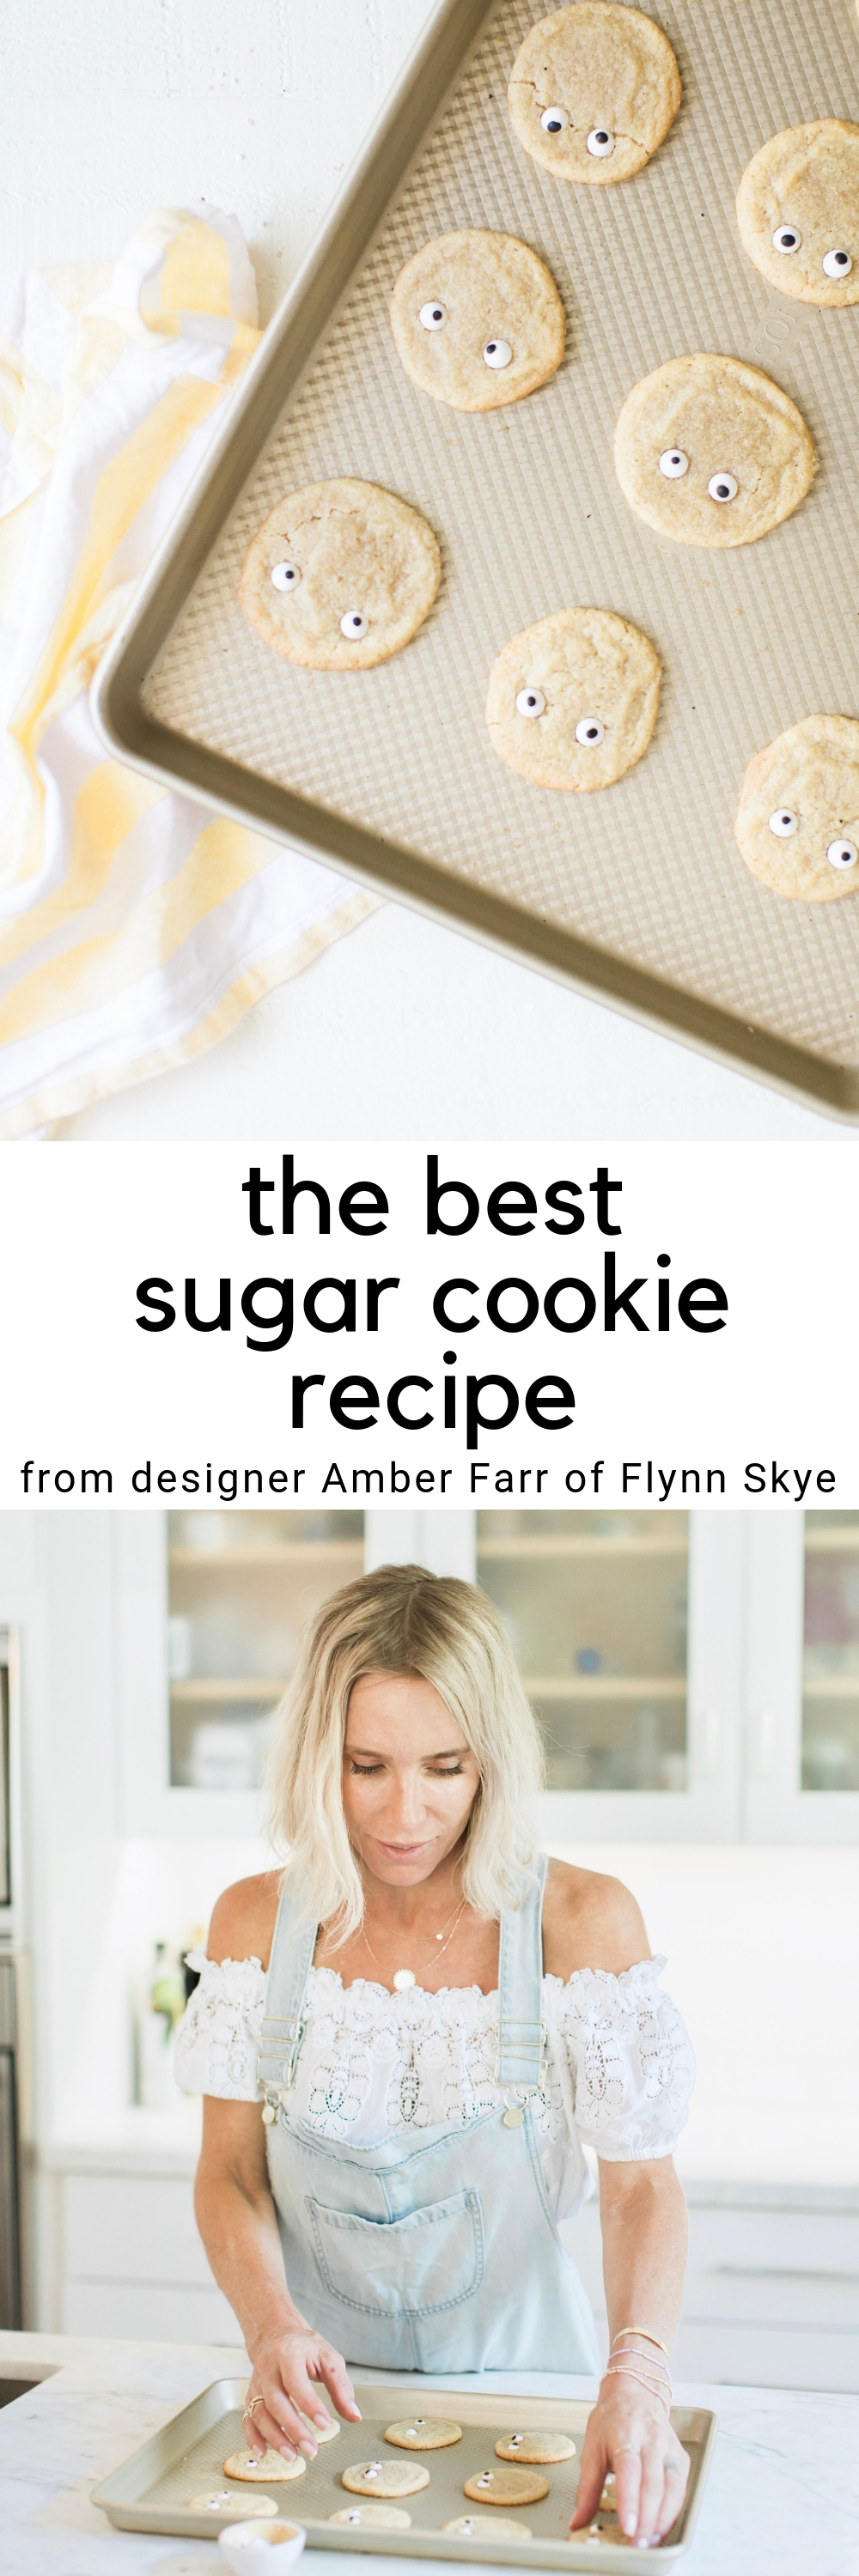 in the kitchen with amber Farr of Flynn skye